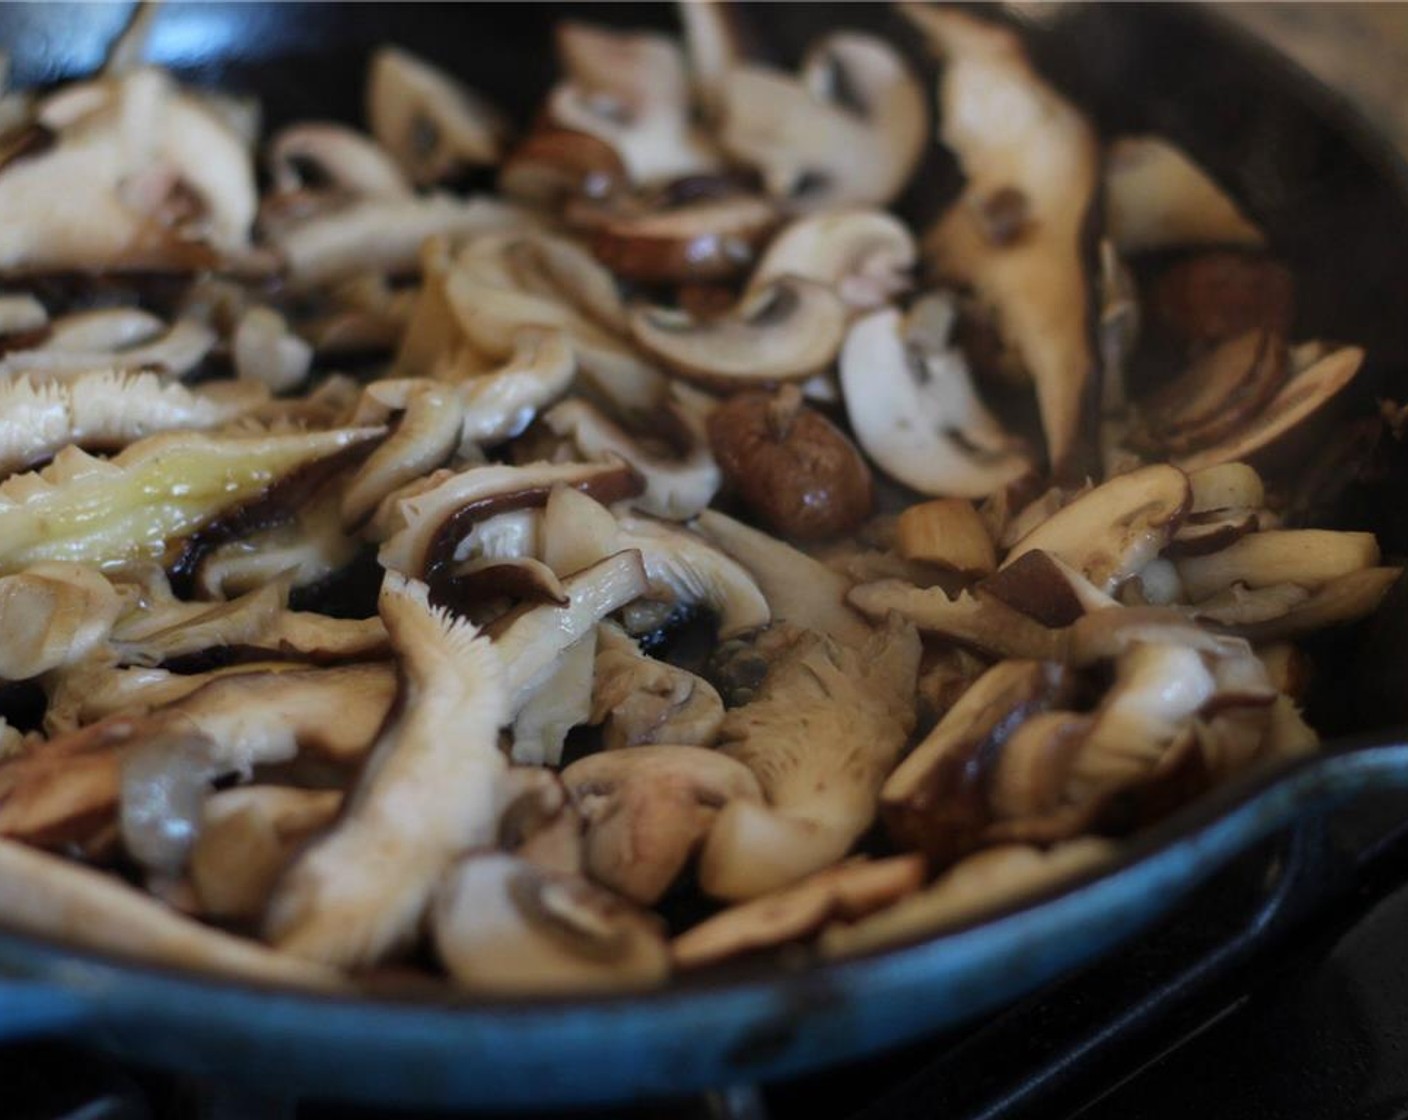 step 4 In a sauté pan over medium heat, heat Olive Oil (1 Tbsp), and sauté mushrooms until lightly browned, softened, and liquid has been reduced.